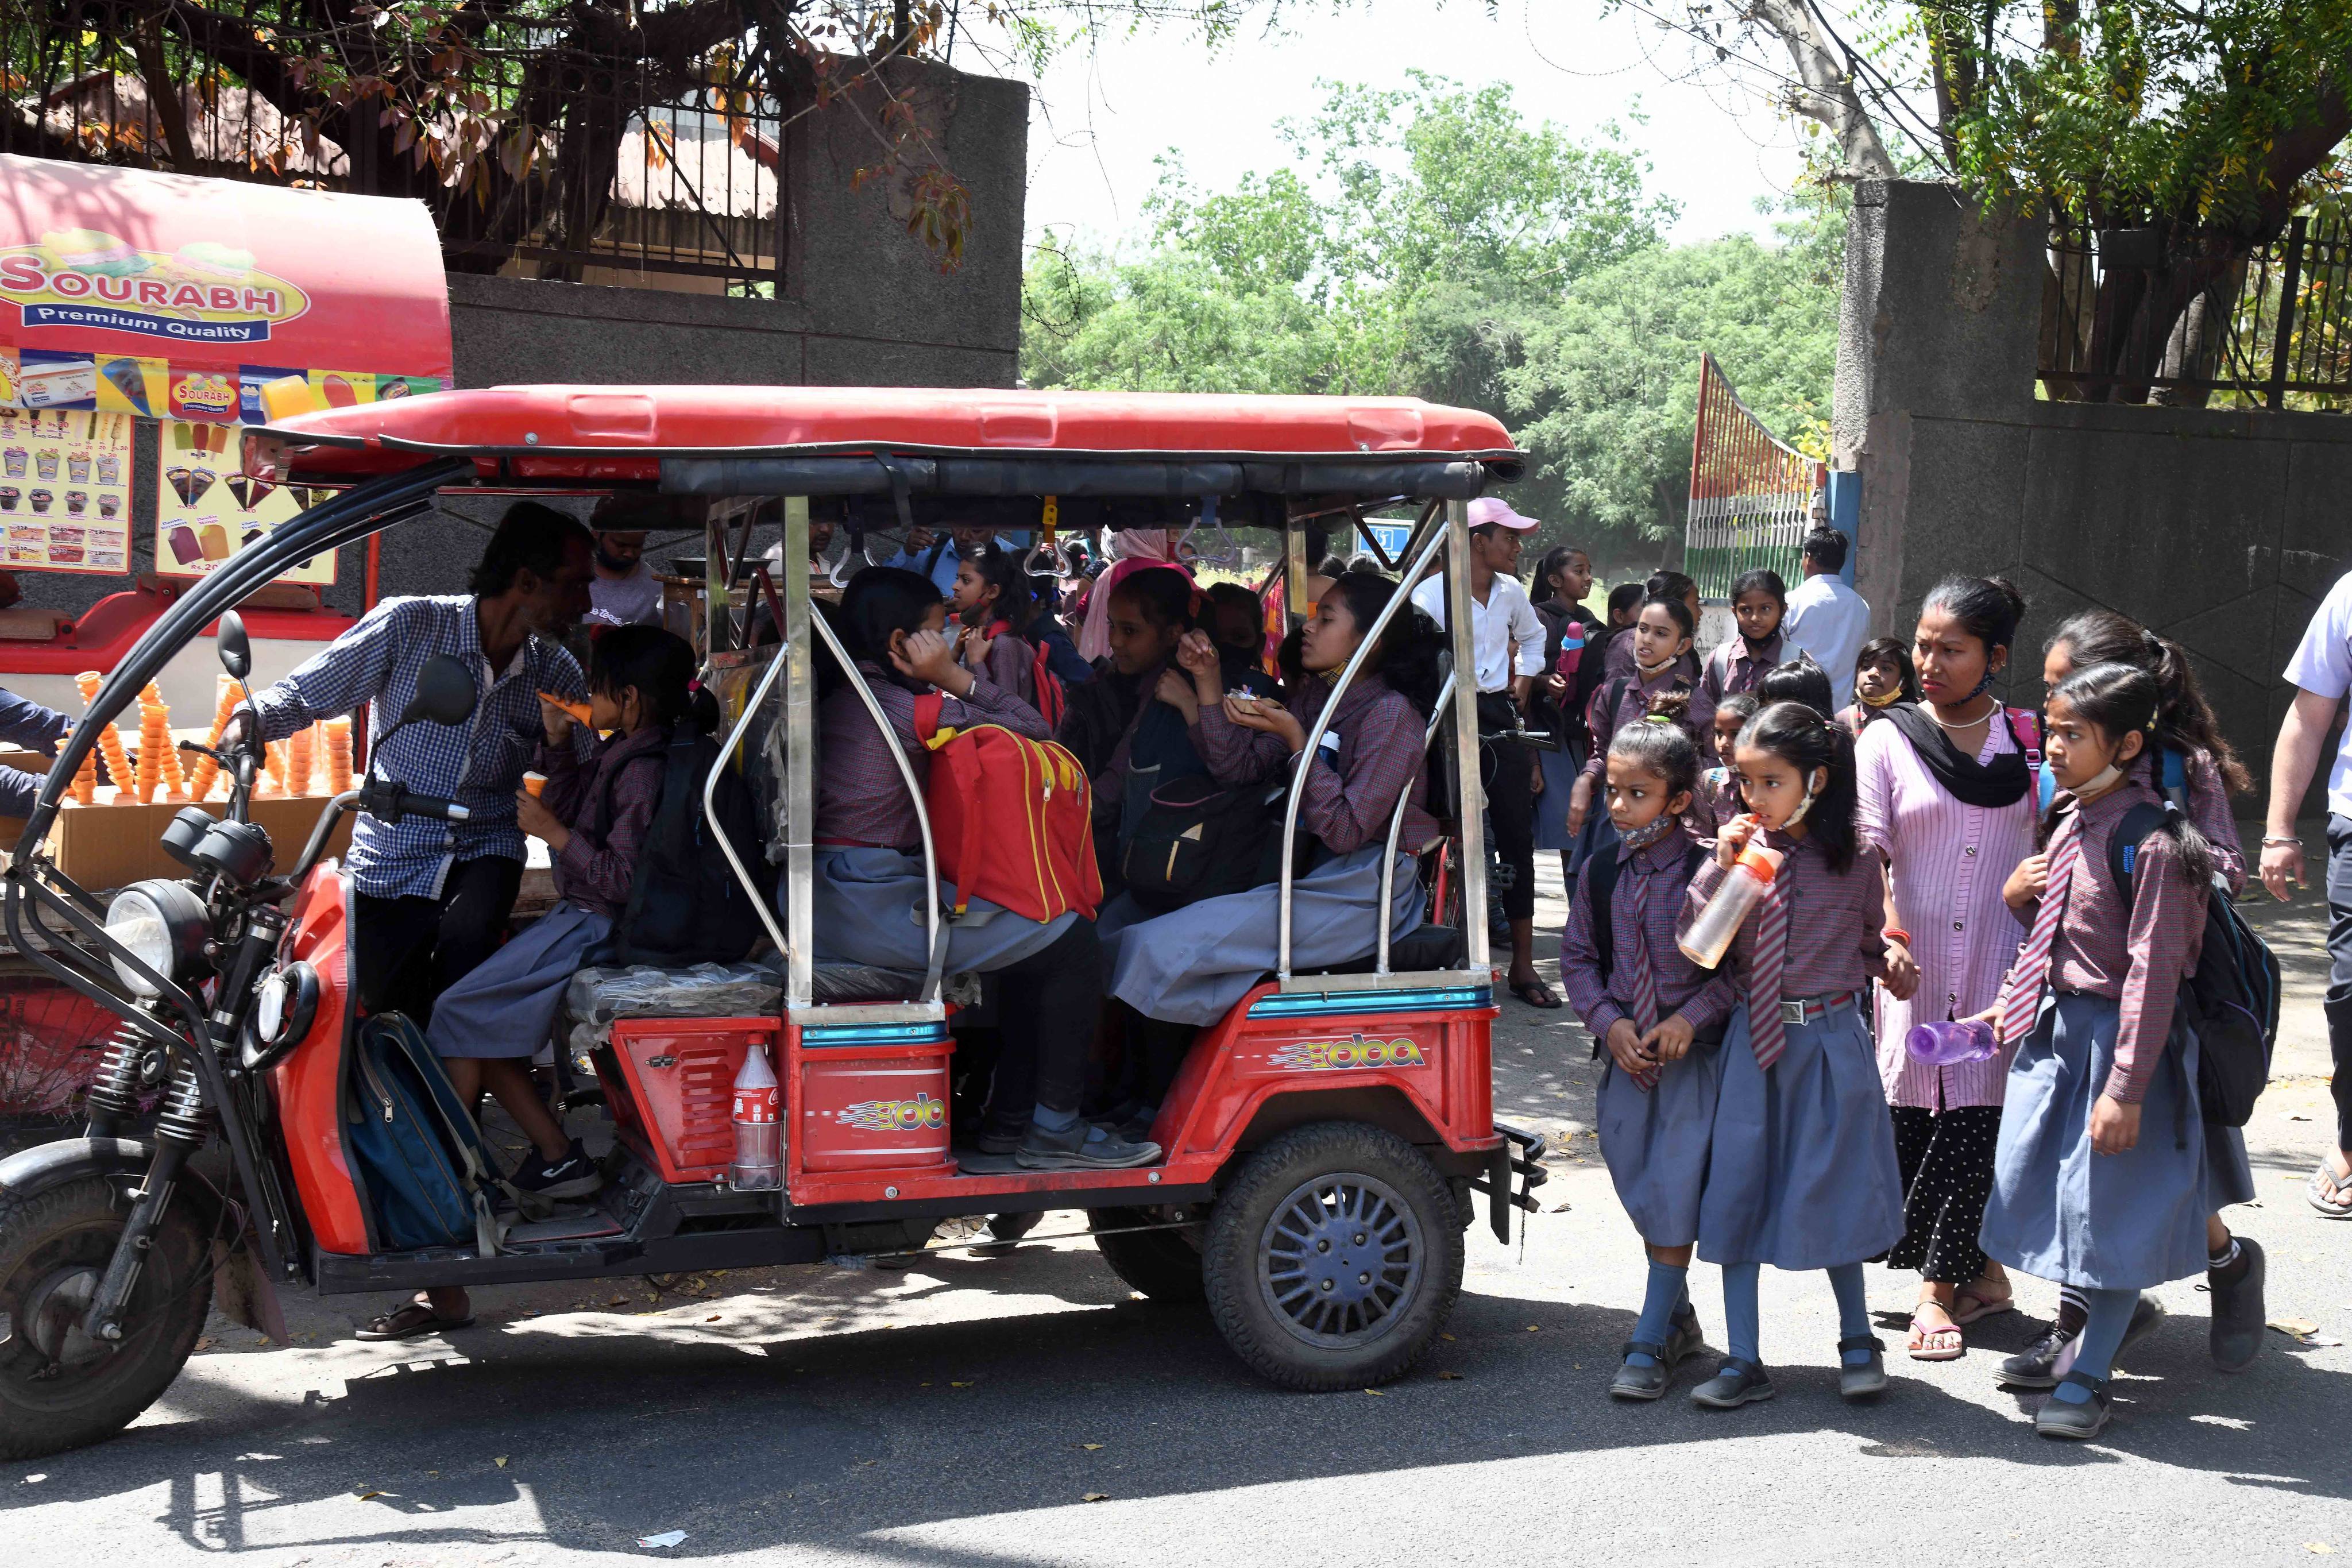 Students on their way home from school. New Delhi reopened schools fully on April 1. Photo: Xinhua
